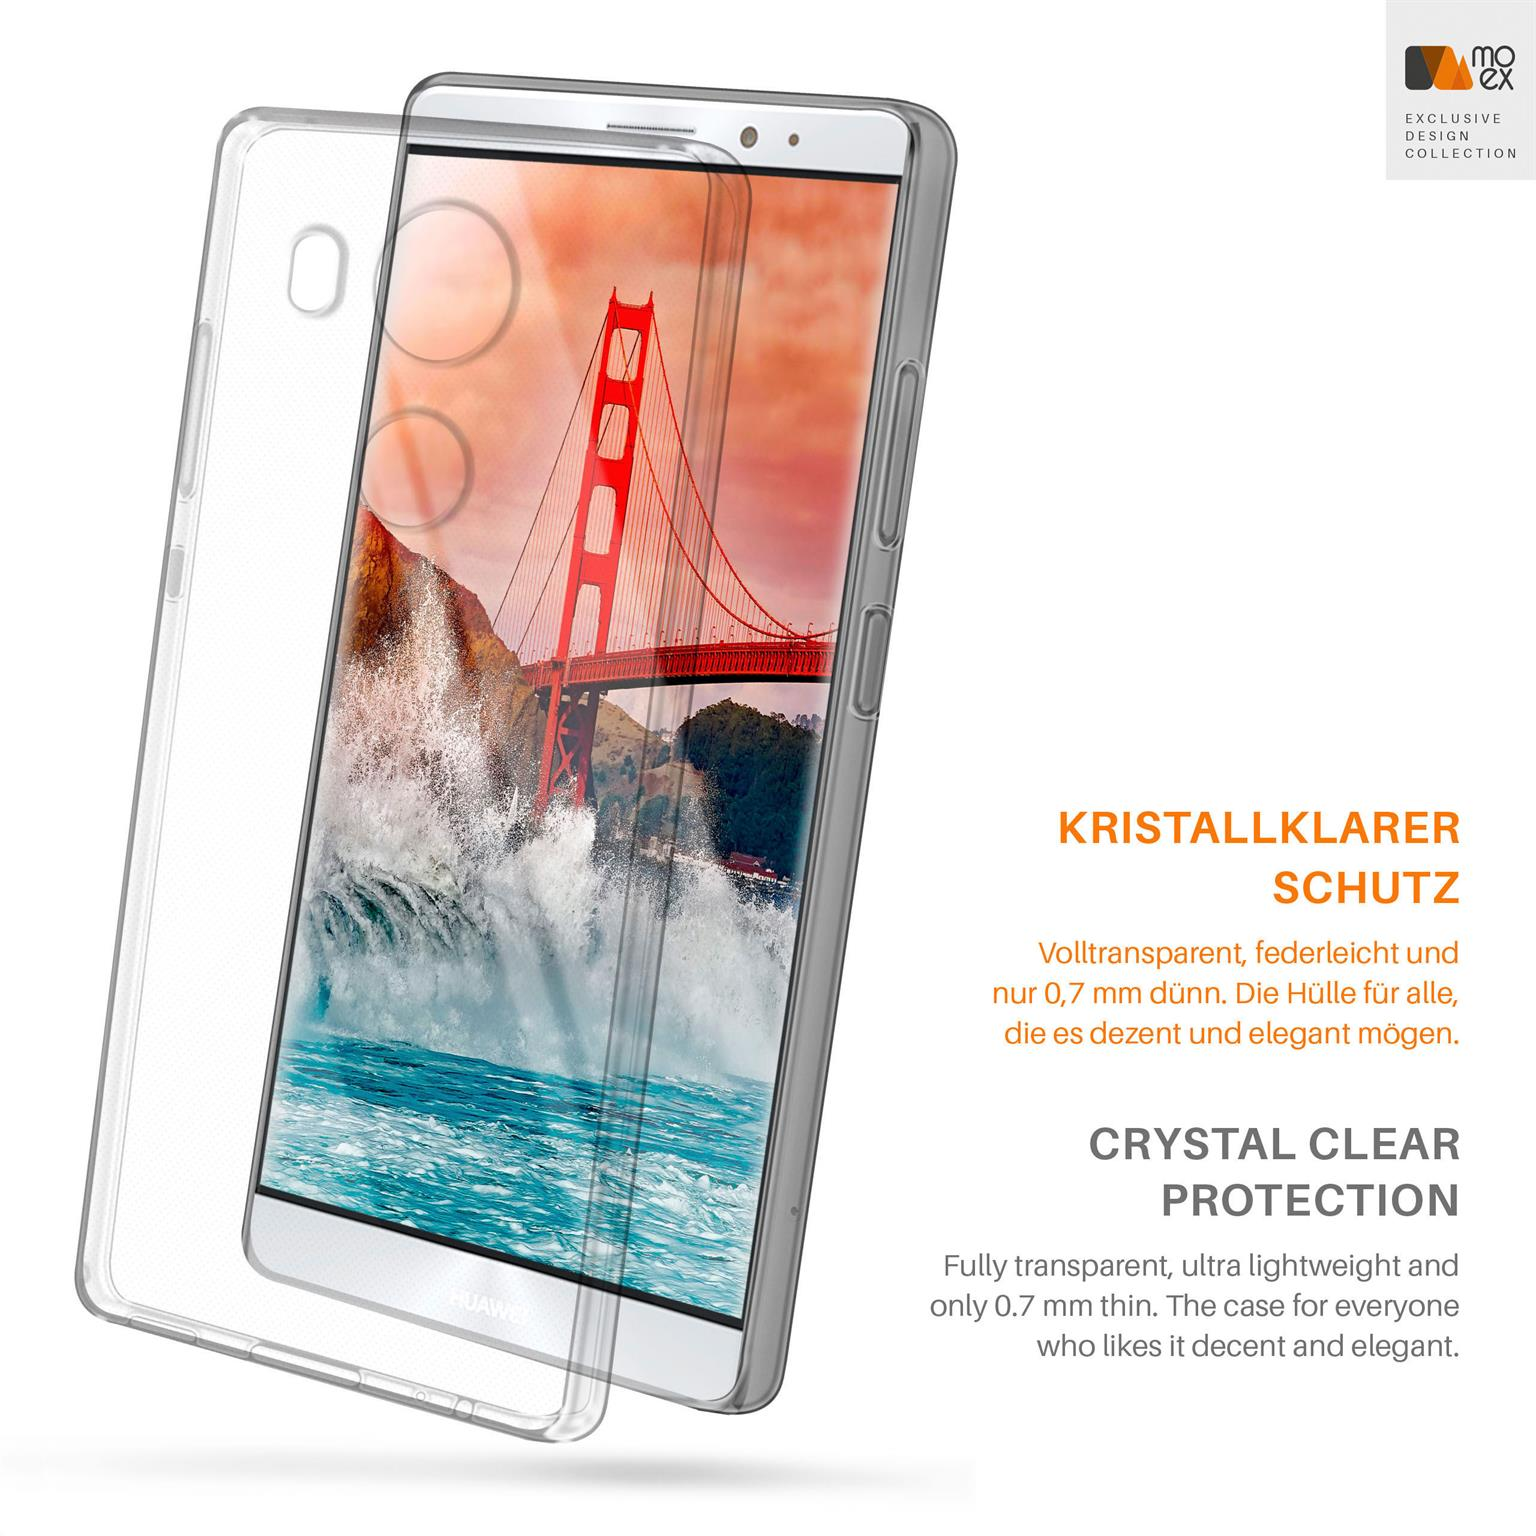 MOEX Aero Case, Backcover, Huawei, 8, Crystal-Clear Mate